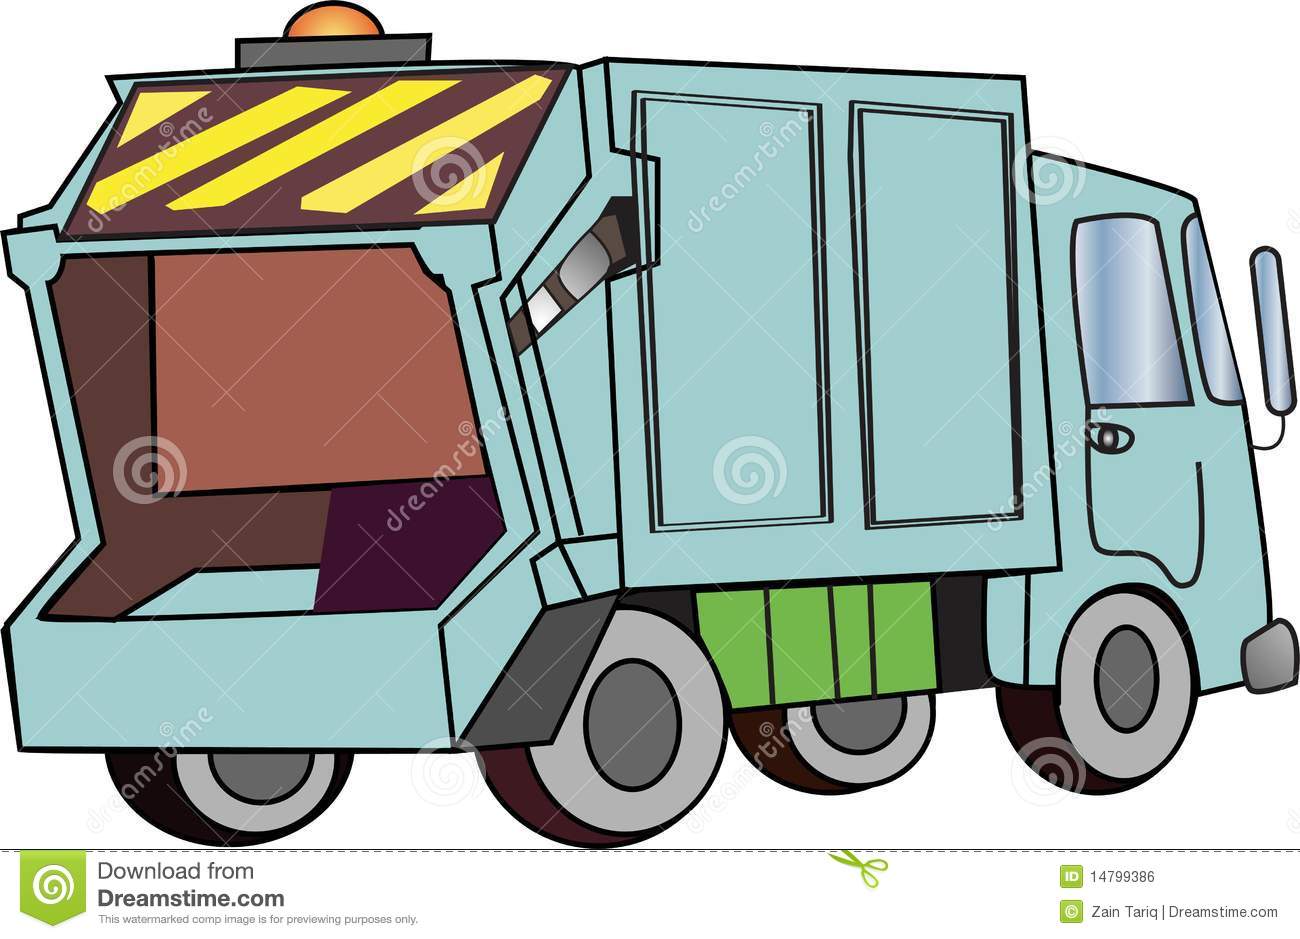 Free Refuse Truck Cliparts, Download Free Clip Art, Free.